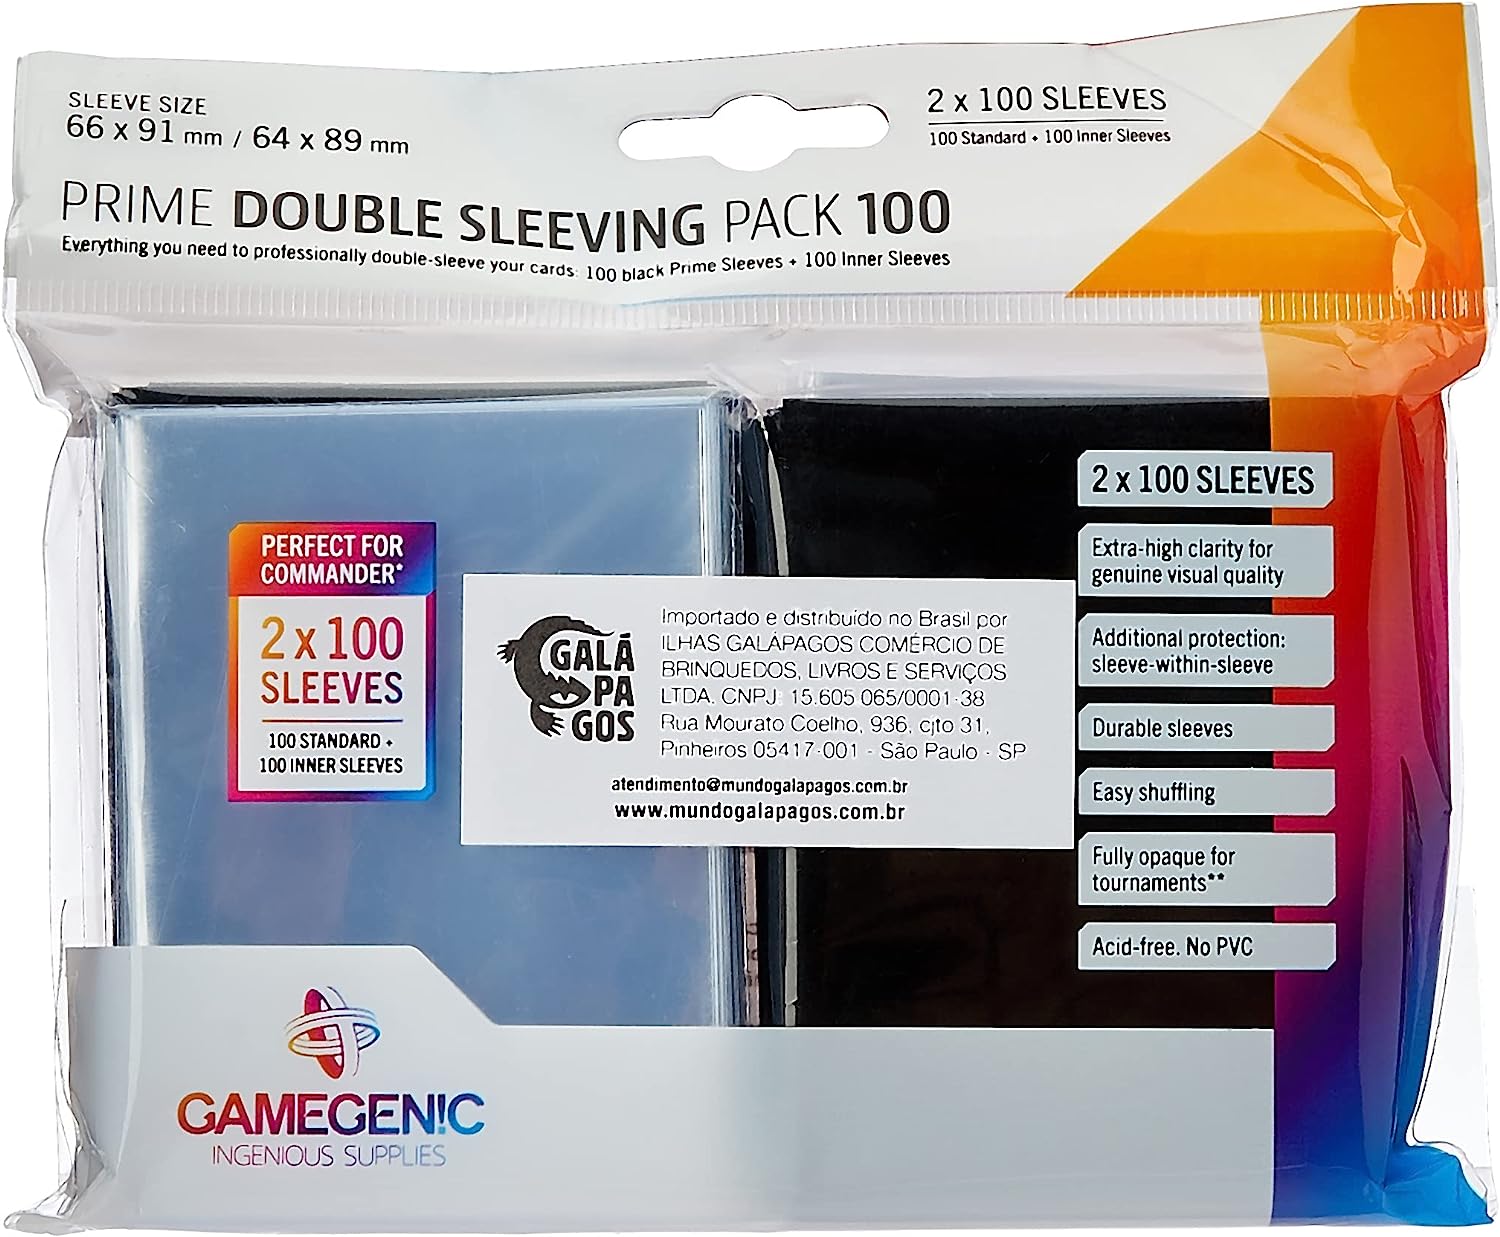 Gamegenic: Prime Double Sleeving Pack 100 Preto